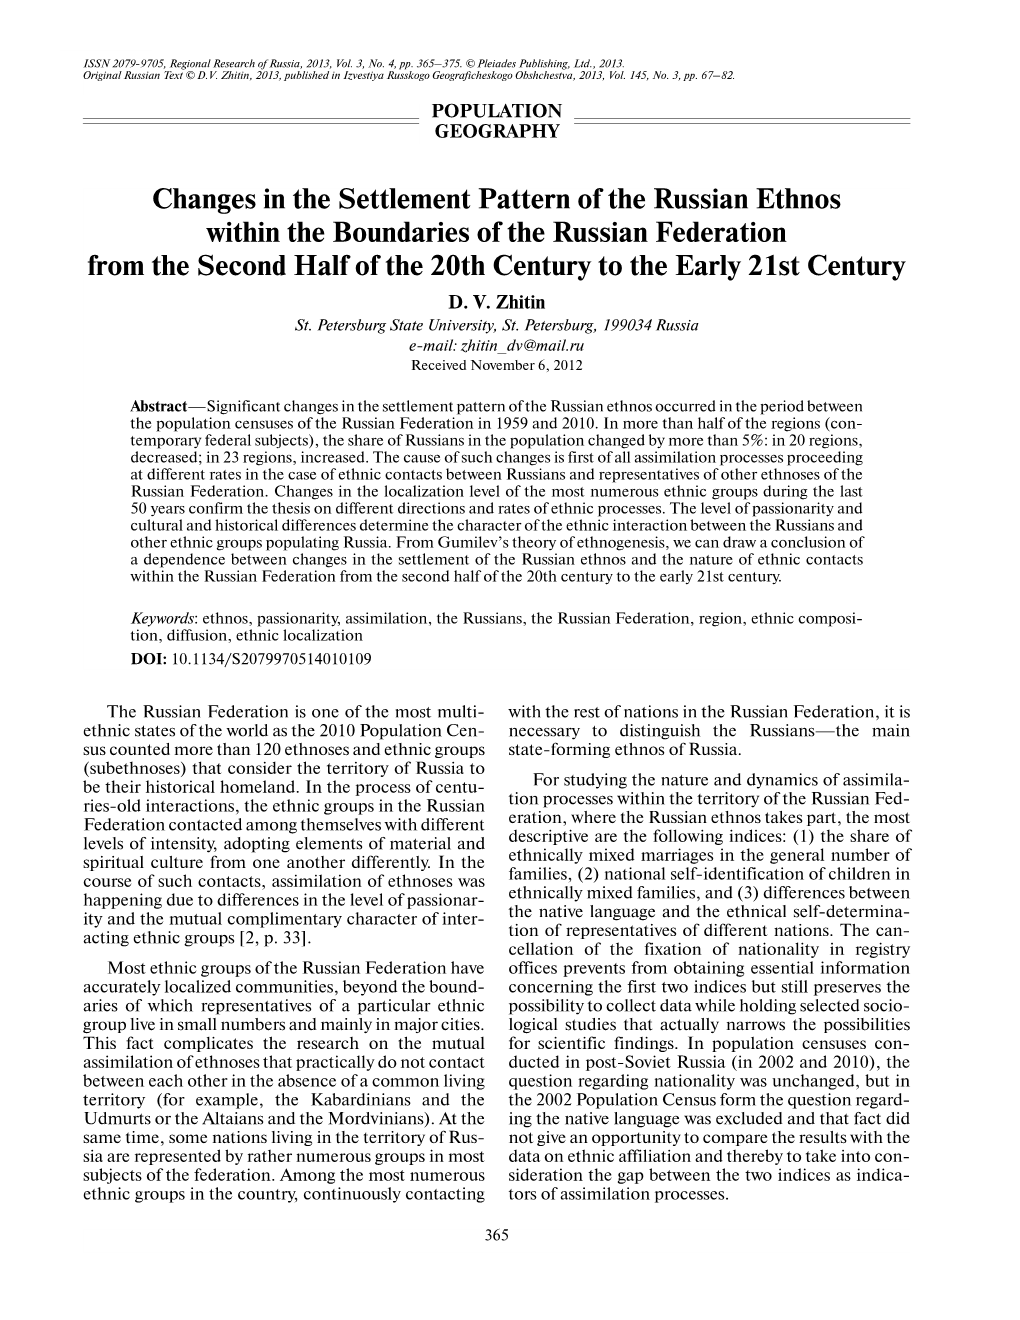 Changes in the Settlement Pattern of the Russian Ethnos Within The